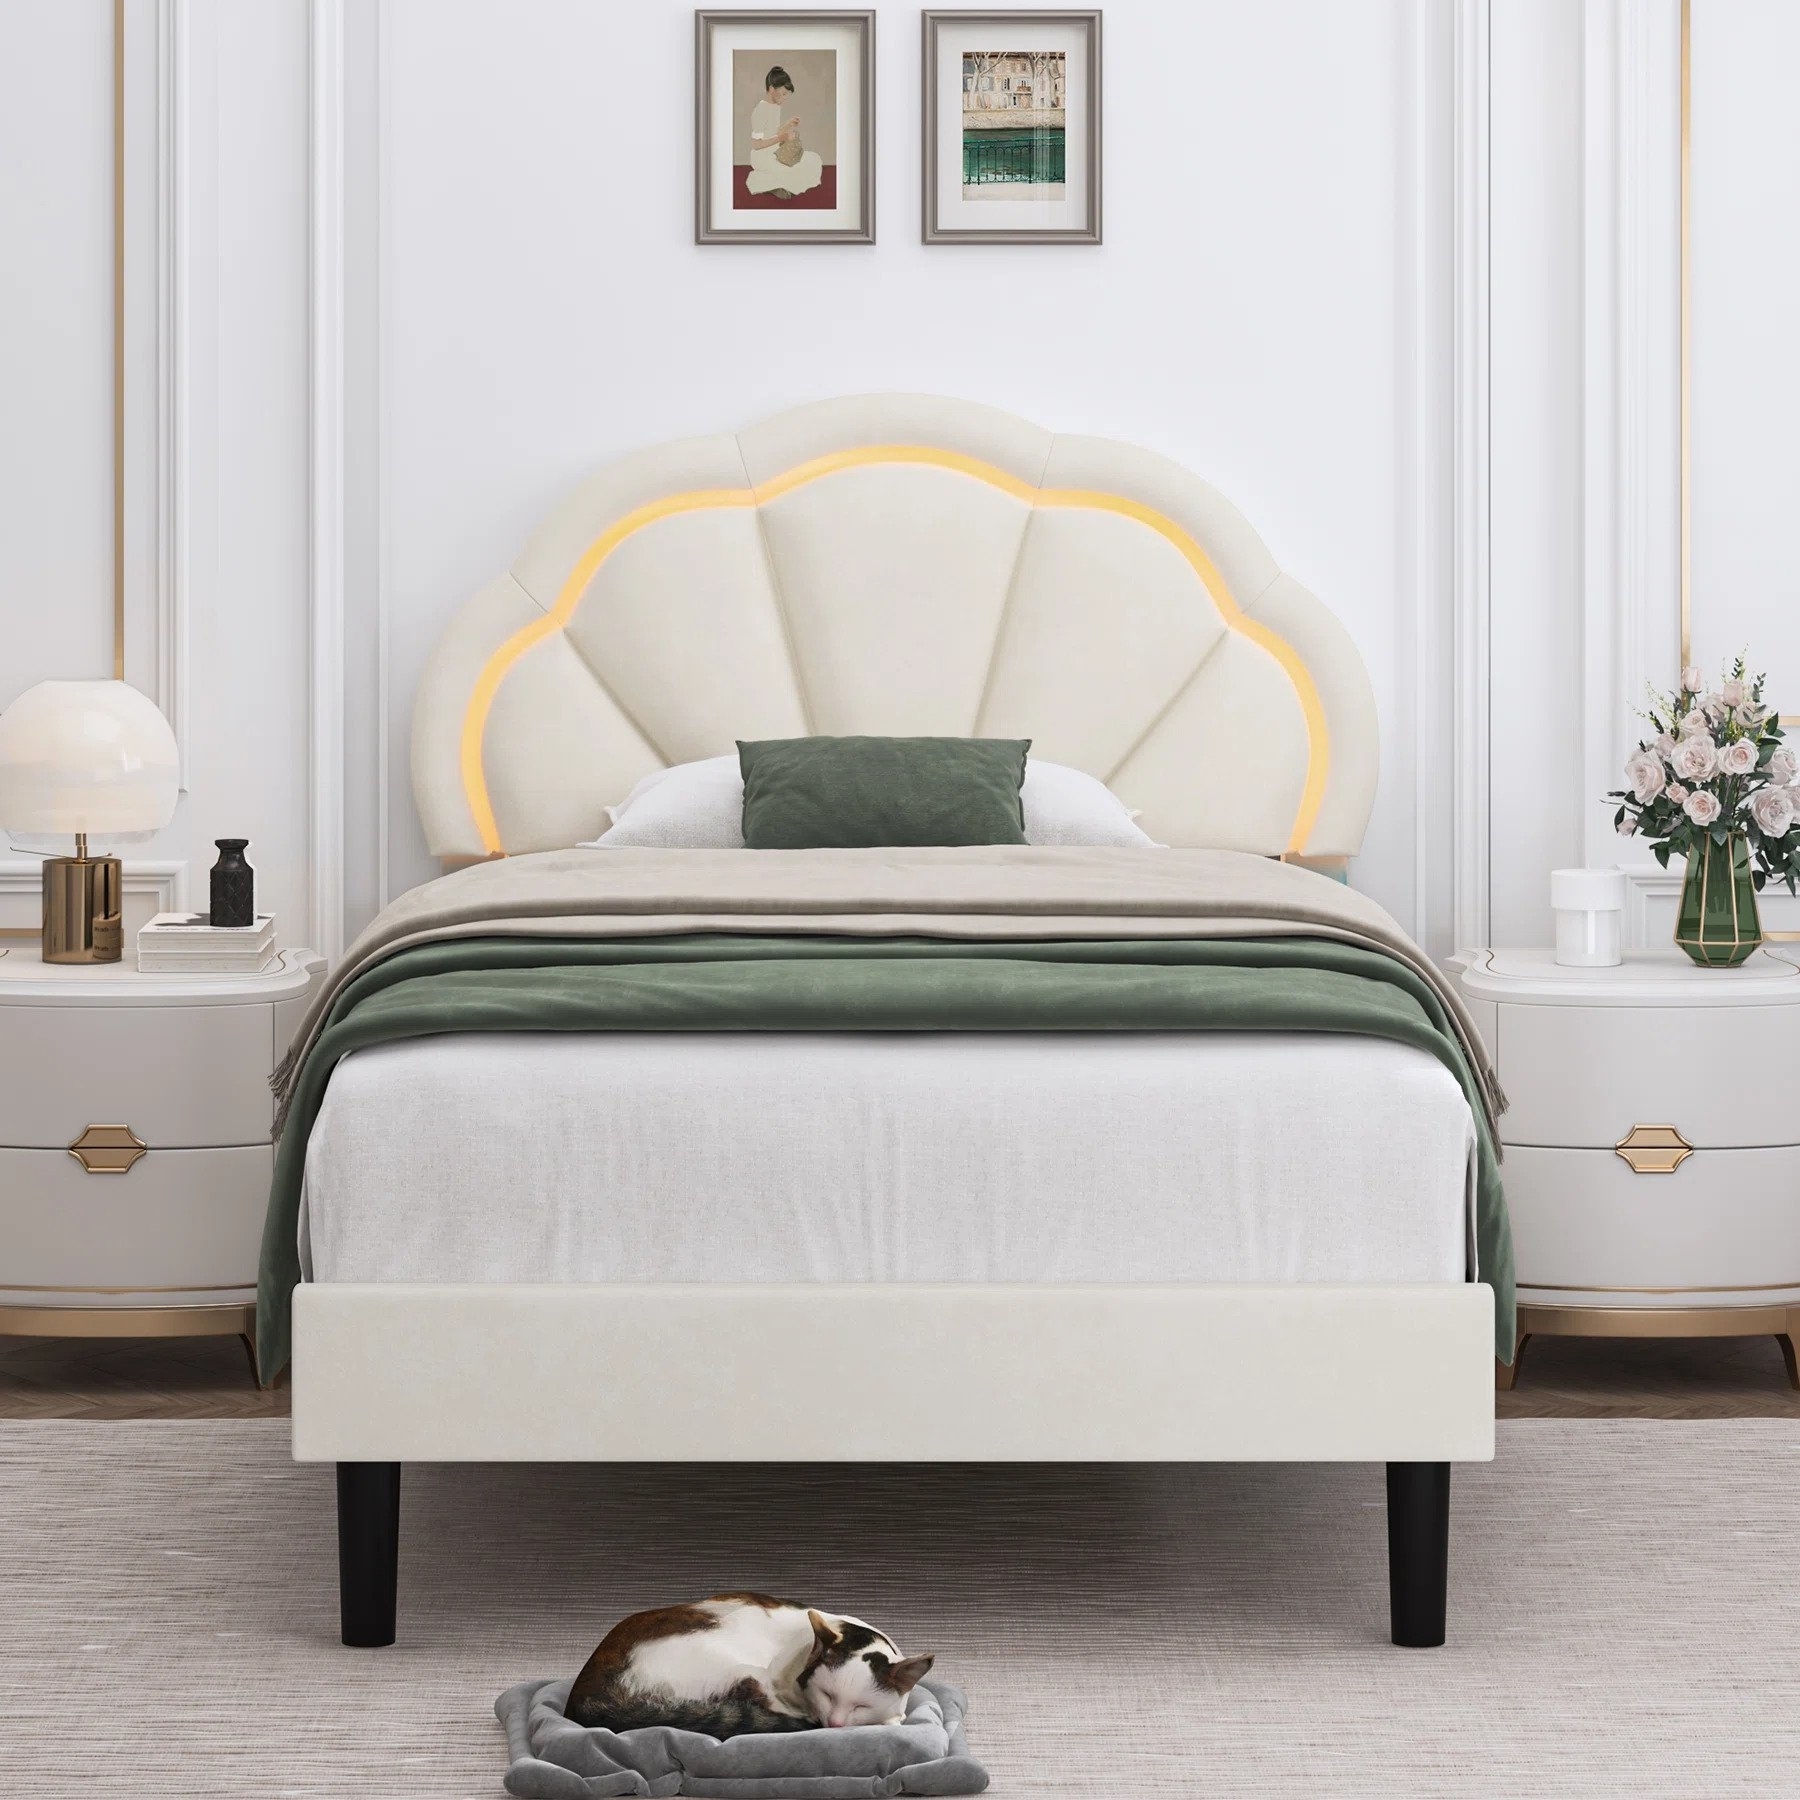 The bed in a cream color, featuring a headboard with a flower silhouette